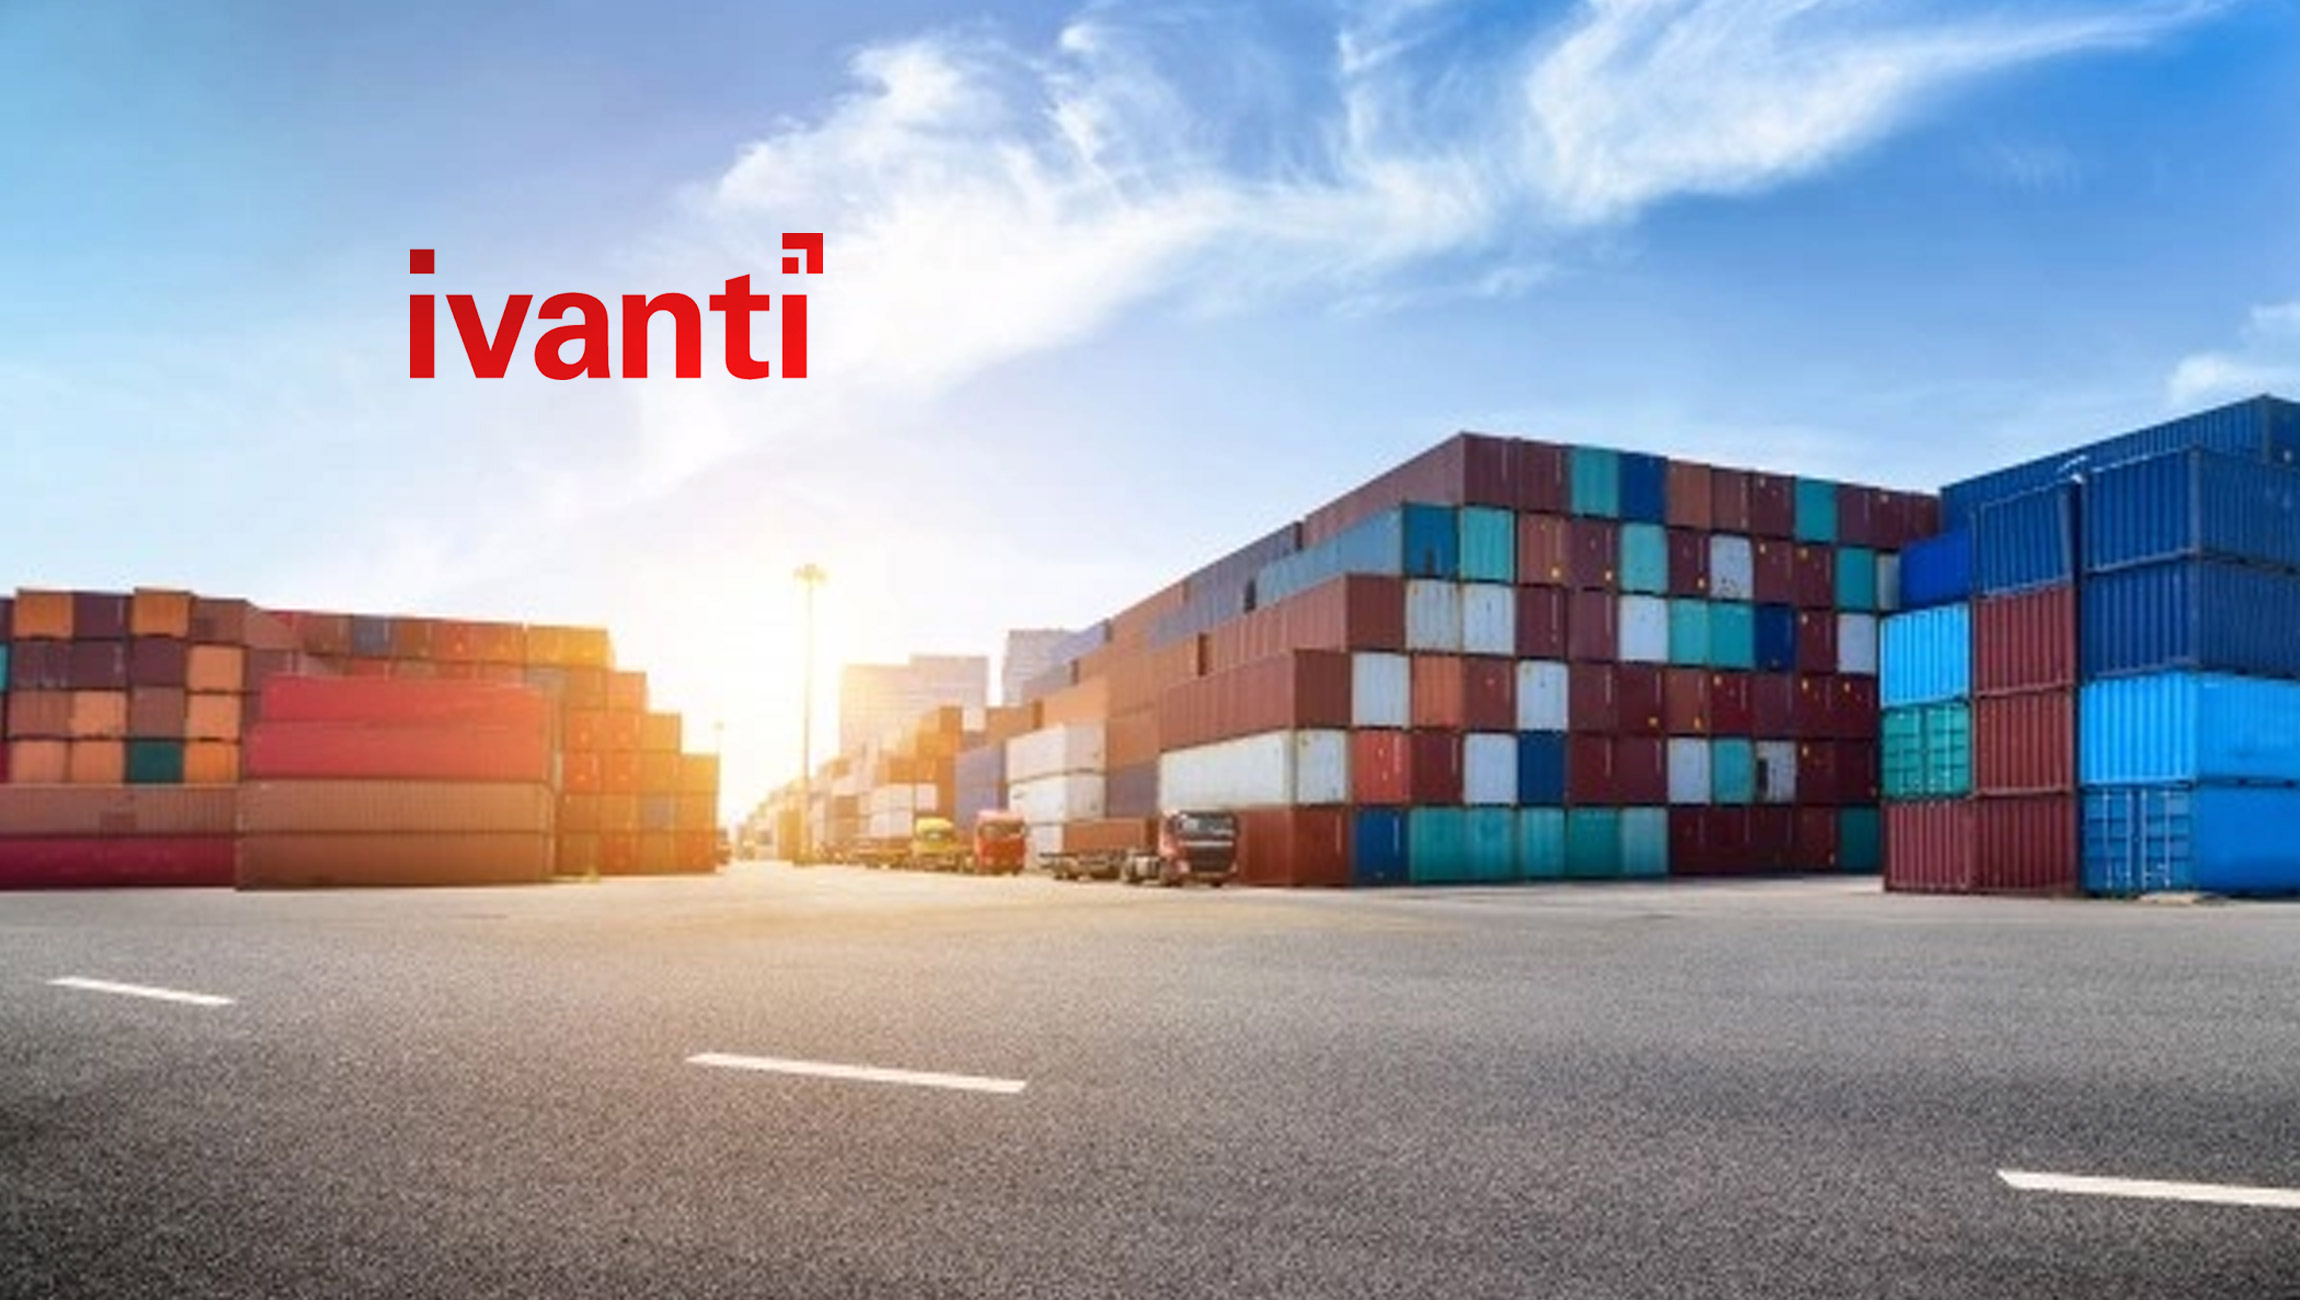 Ivanti Extends an Award-Winning Velocity Product with the ‘Ivanti Neurons for IIoT’ Platform to Accelerate Supply Chain Operations with Digital Transformation